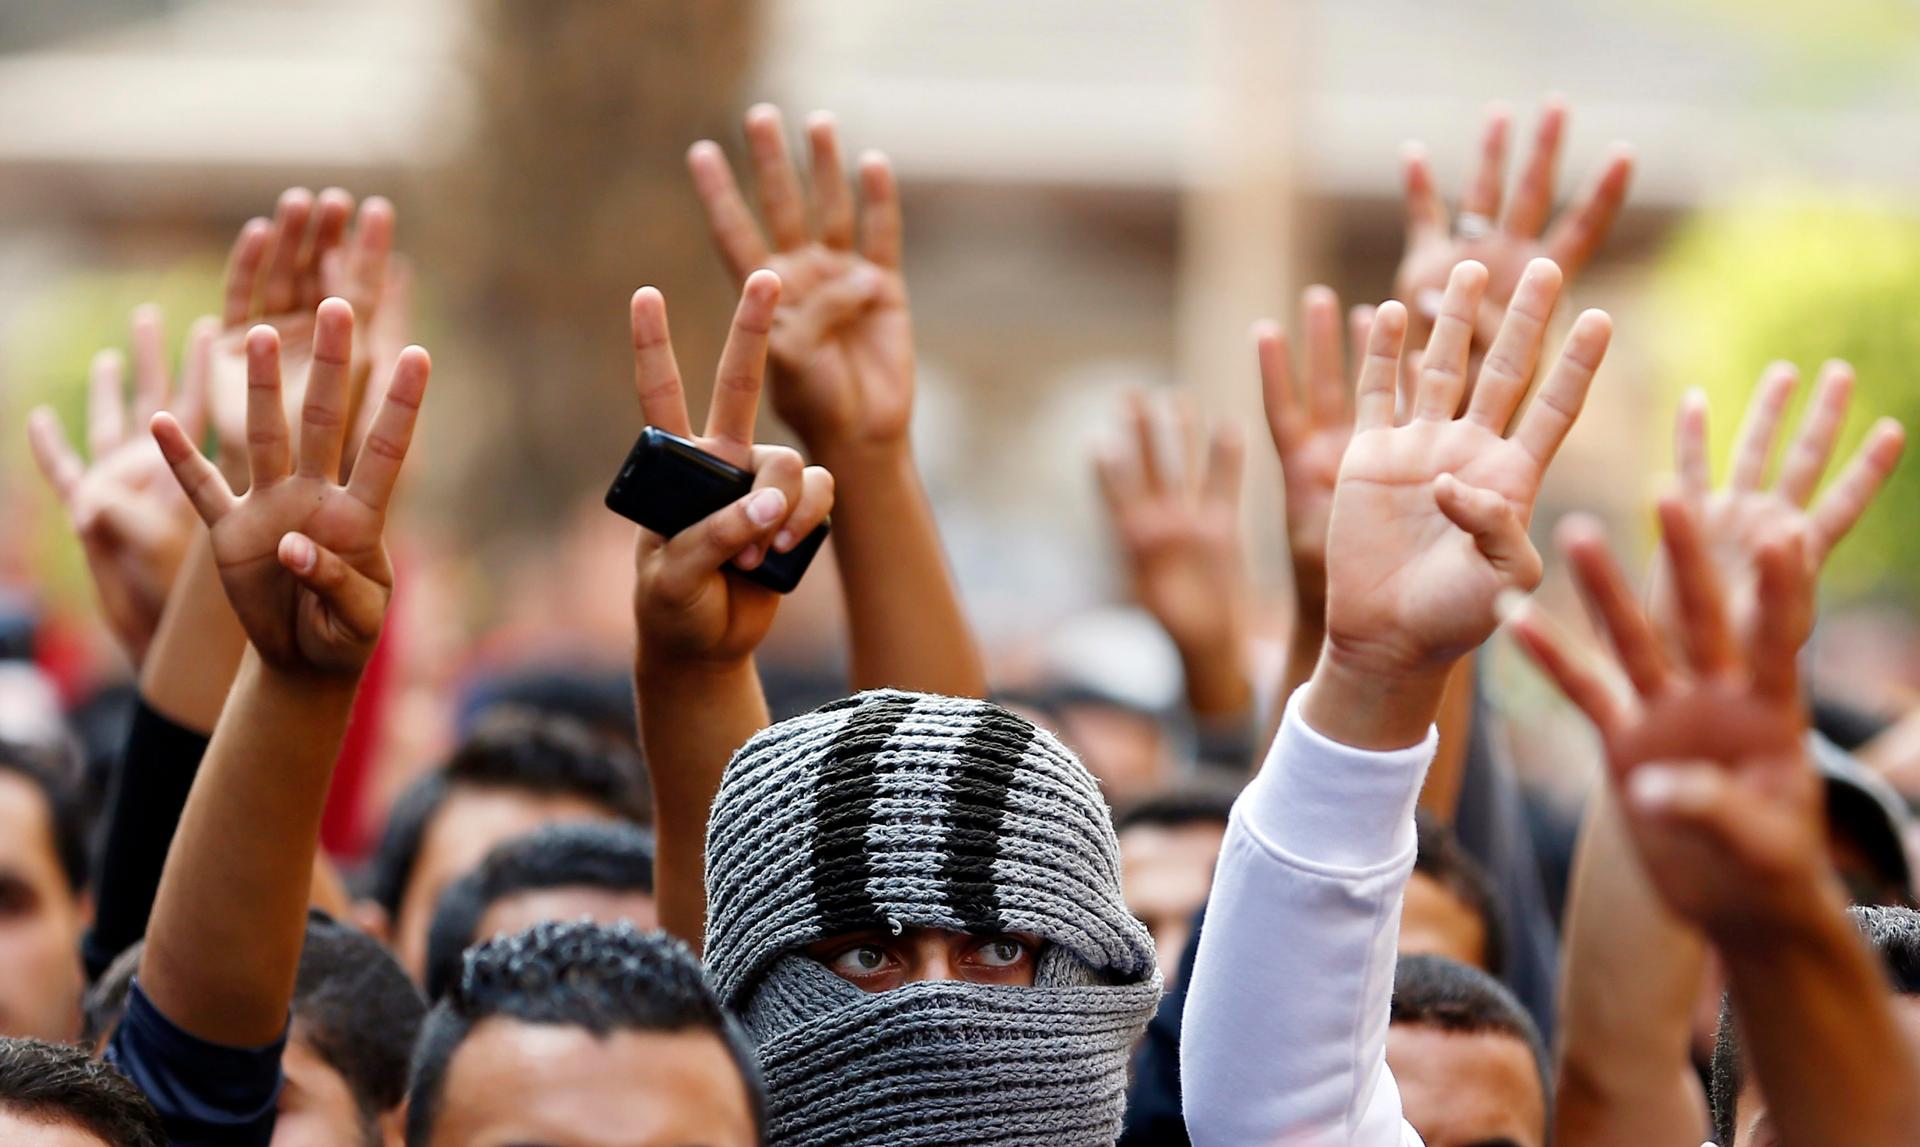 Cairo University students shout slogans against the government and flash the "V" and "Rabaa" signs, protesting the release of former Egyptian President Hosni Mubarak's. Protests erupted at universities across Egypt on November 30, 2014, in response to the